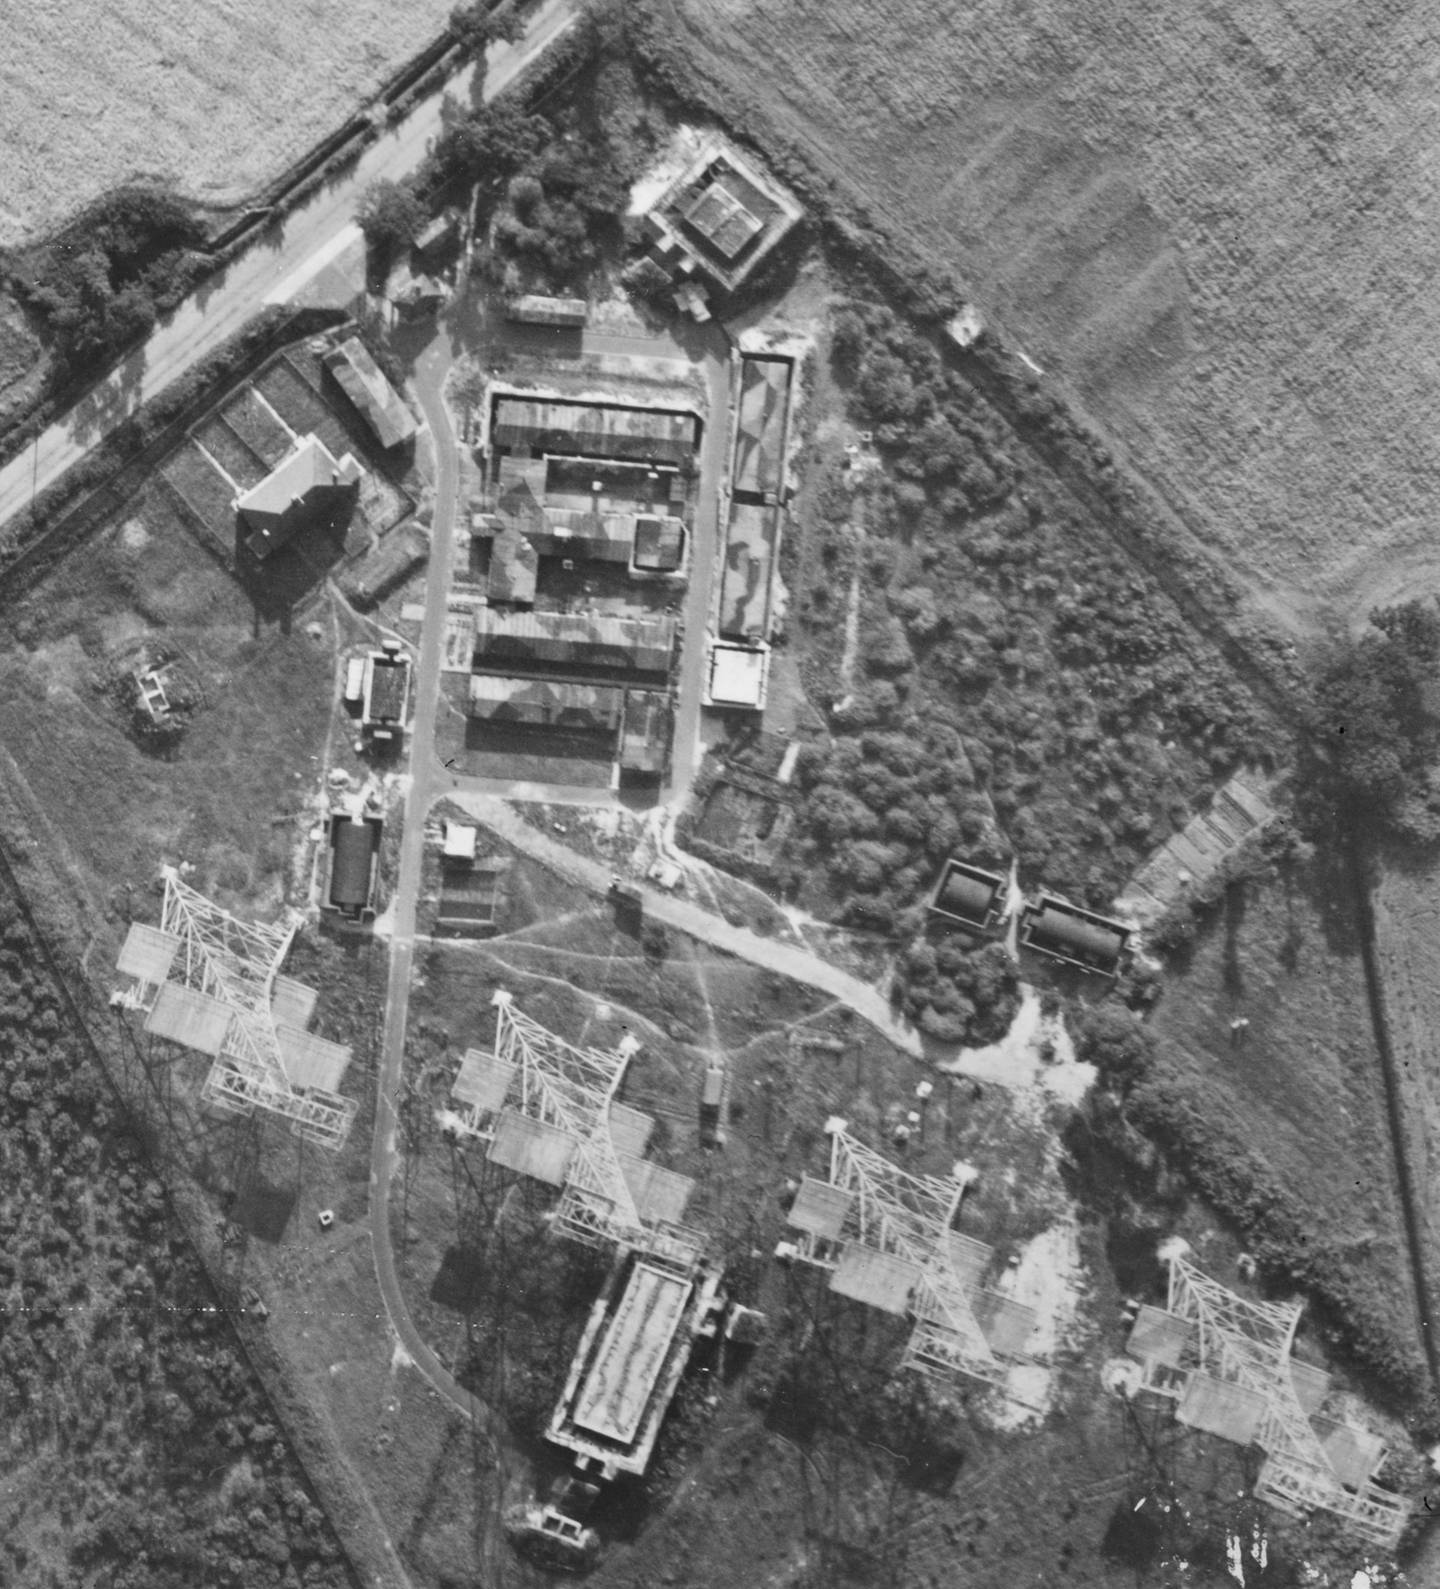 In this aerial photo released by the Historic England Archive taken by the United States Army Air Force, a view of Chain Home radar station in Darsham, England, on Aug. 5, 1944, showing the four transmitter aerial towers and camouflaged huts.